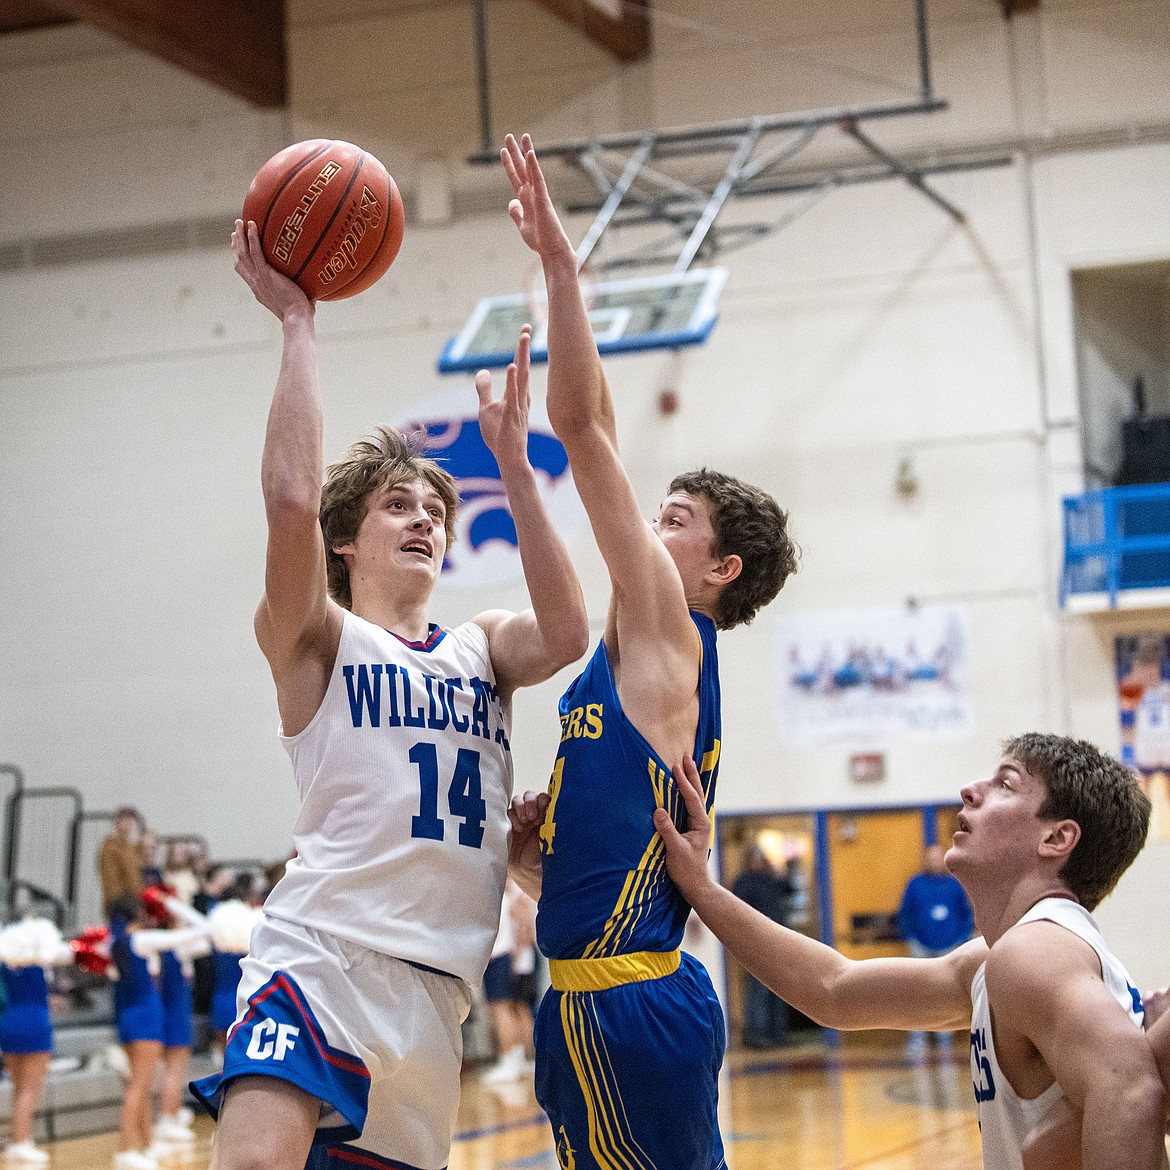 Jace Hill (14) takes a shot for the Wildcats against Polson at home Tuesday, Feb. 13. (Avery Howe photo)